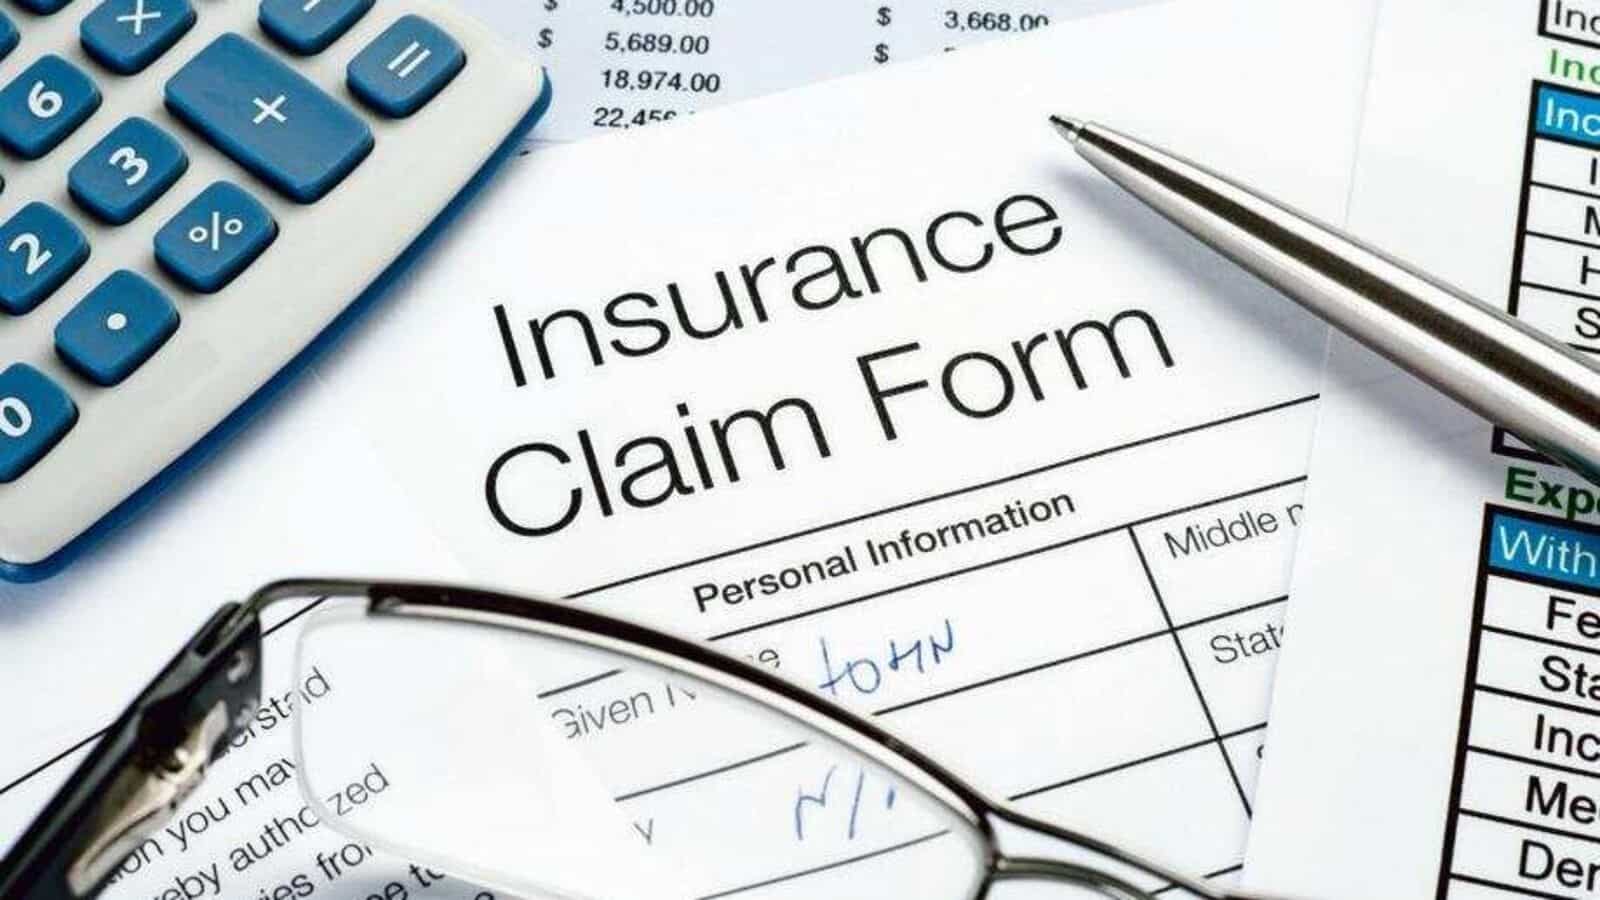 Is there any time limit for filing insurance claims?